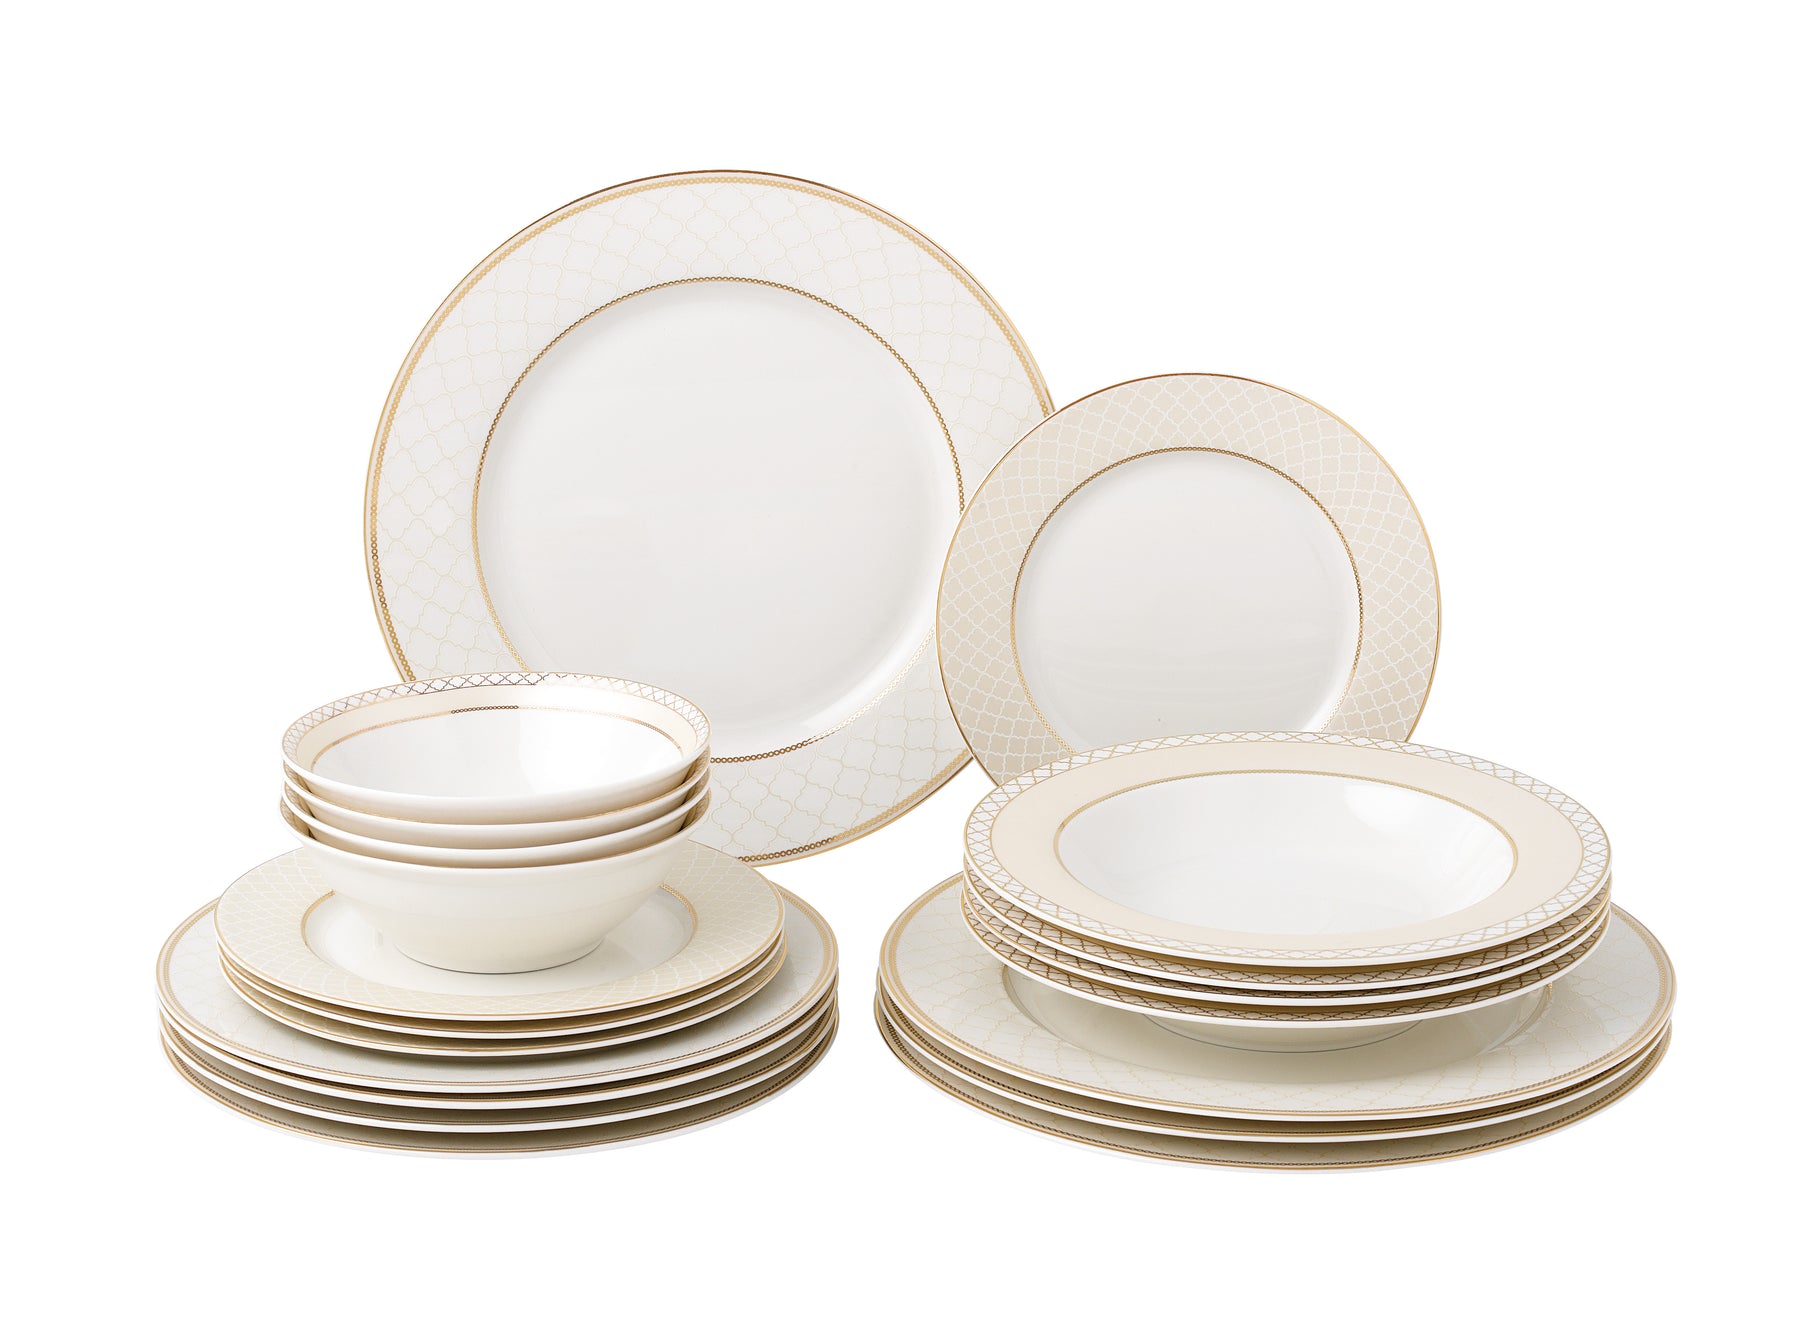 Lorren Home 20 Piece Bone China Dinnerware Set, Gold Moroccan Trellis, Service for 4, Dishwasher Safe, Includes Dinner Plate, Salad, Dessert, Soup and Compote Bowl